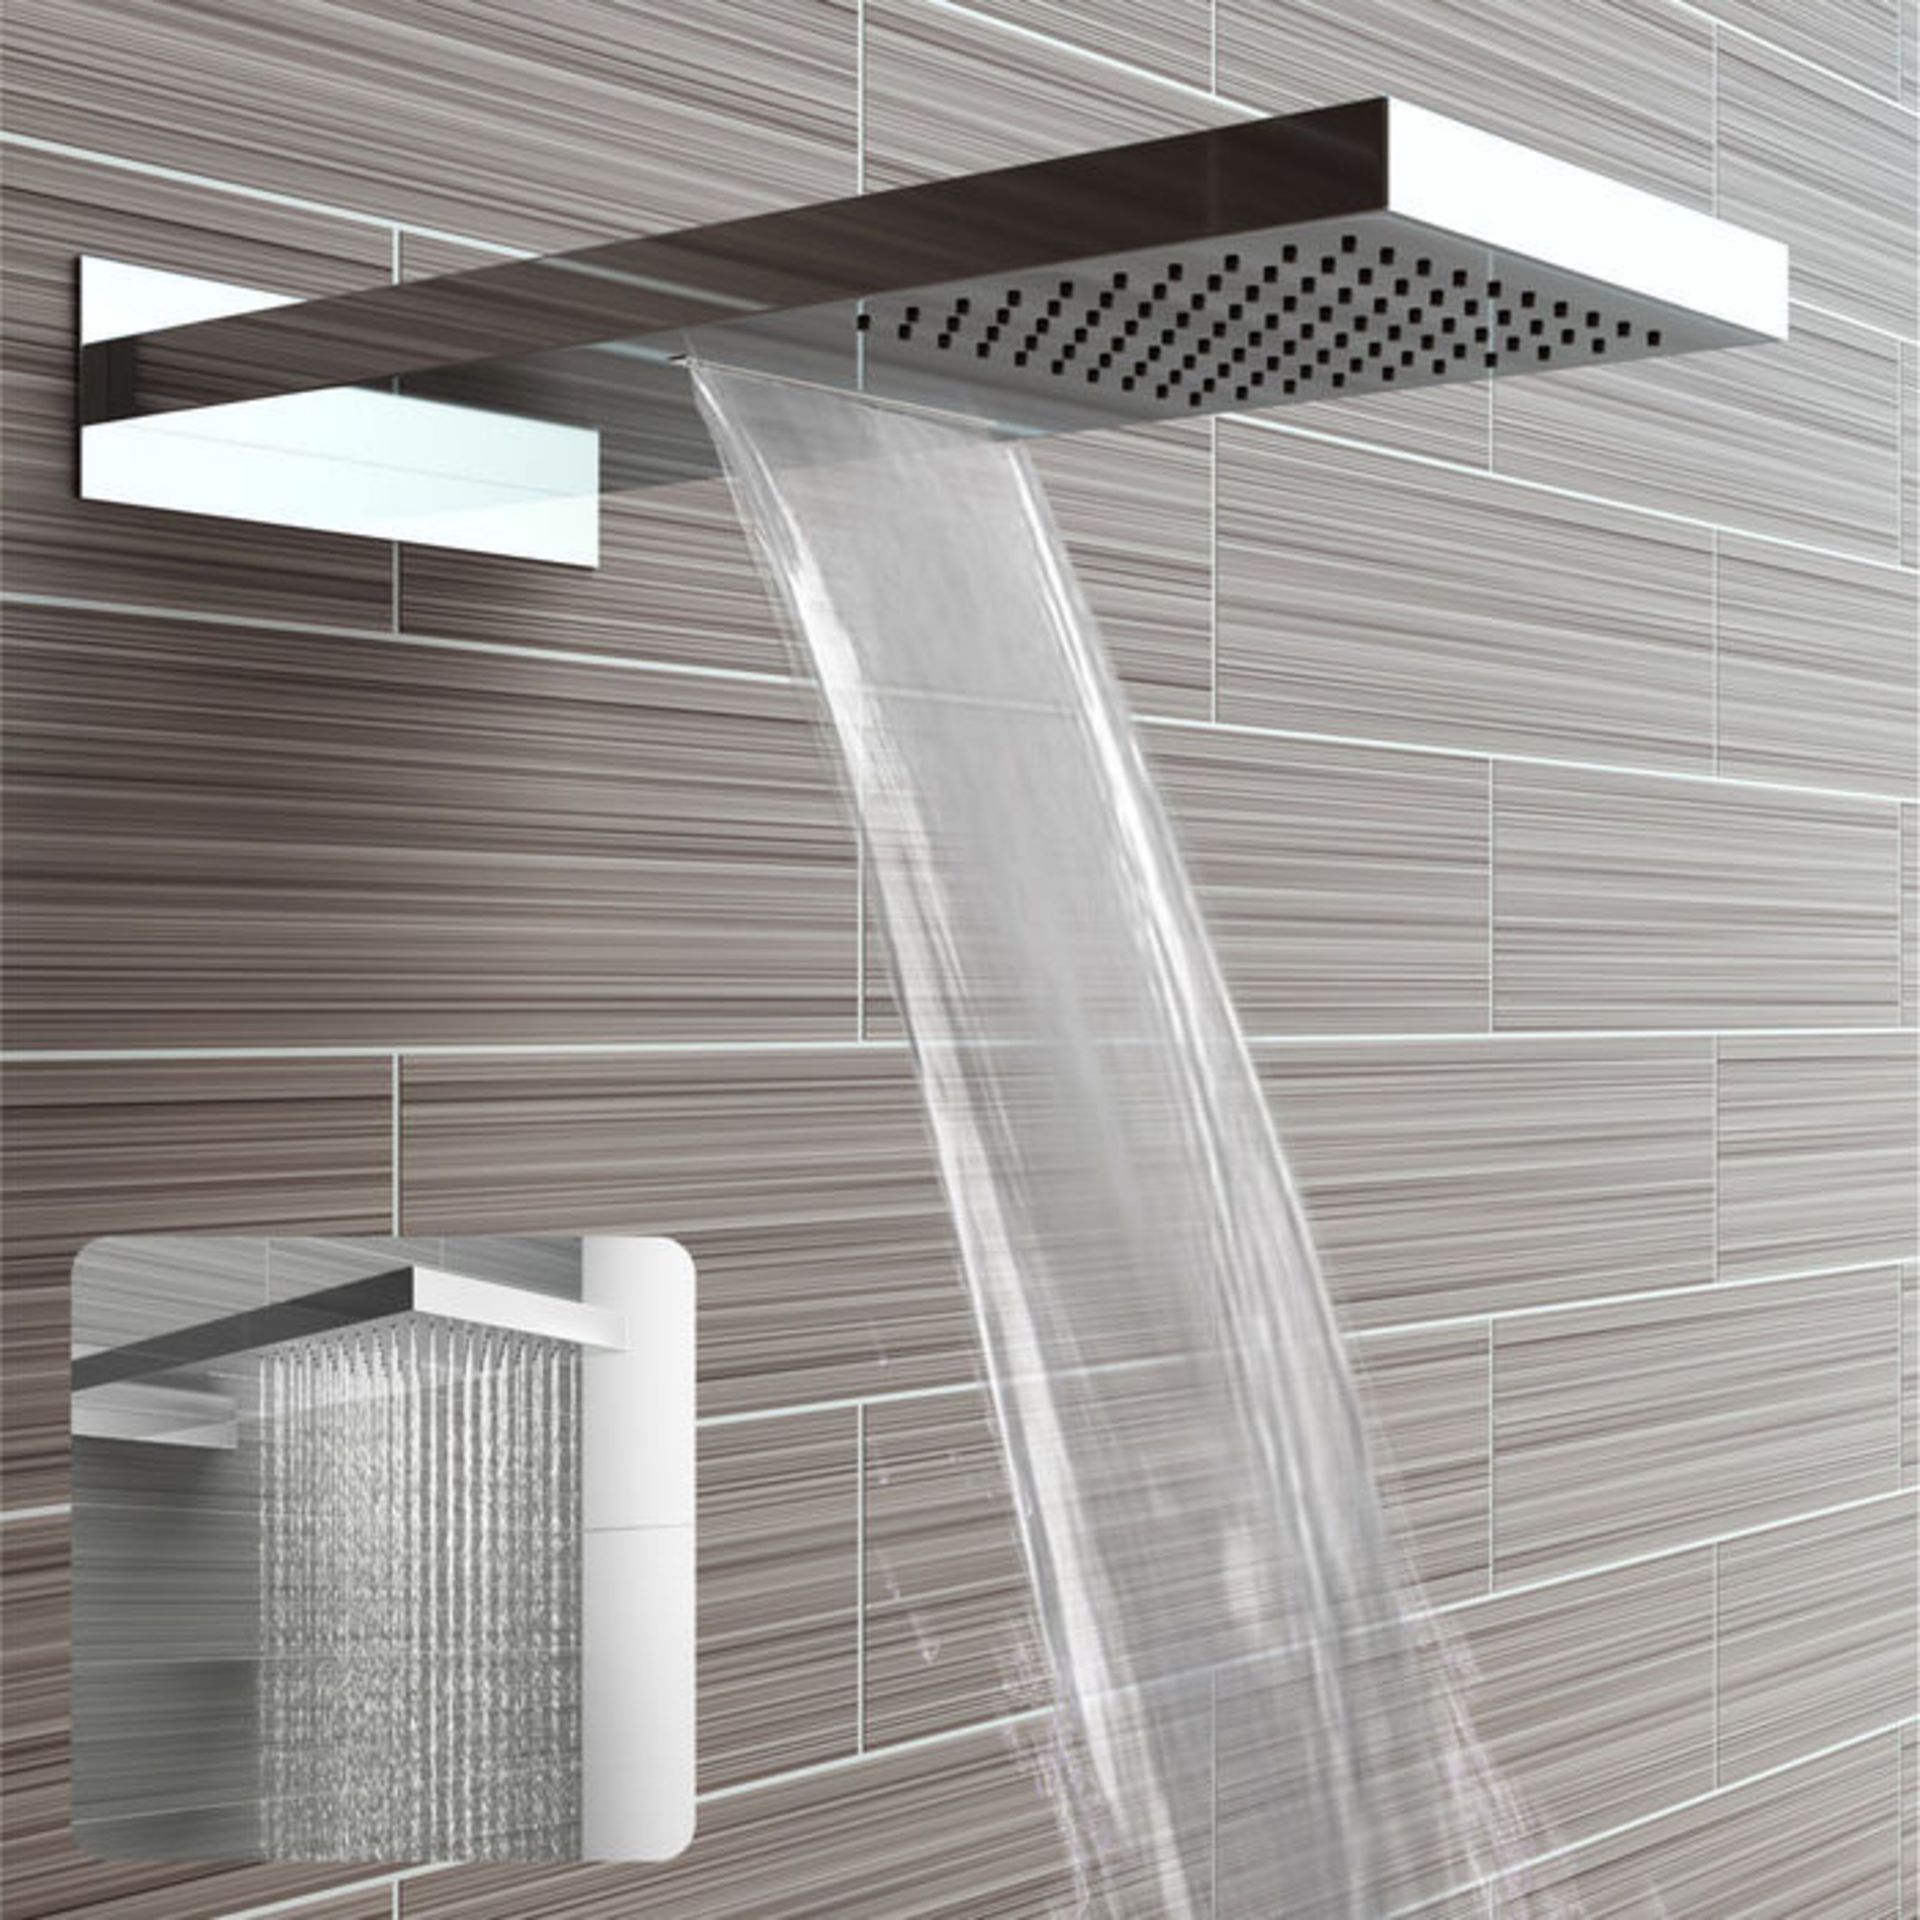 (CT7) 230x500mm Stainless Steel Waterfall Shower Head. RRP £374.98. Dual function waterfall and - Image 5 of 12